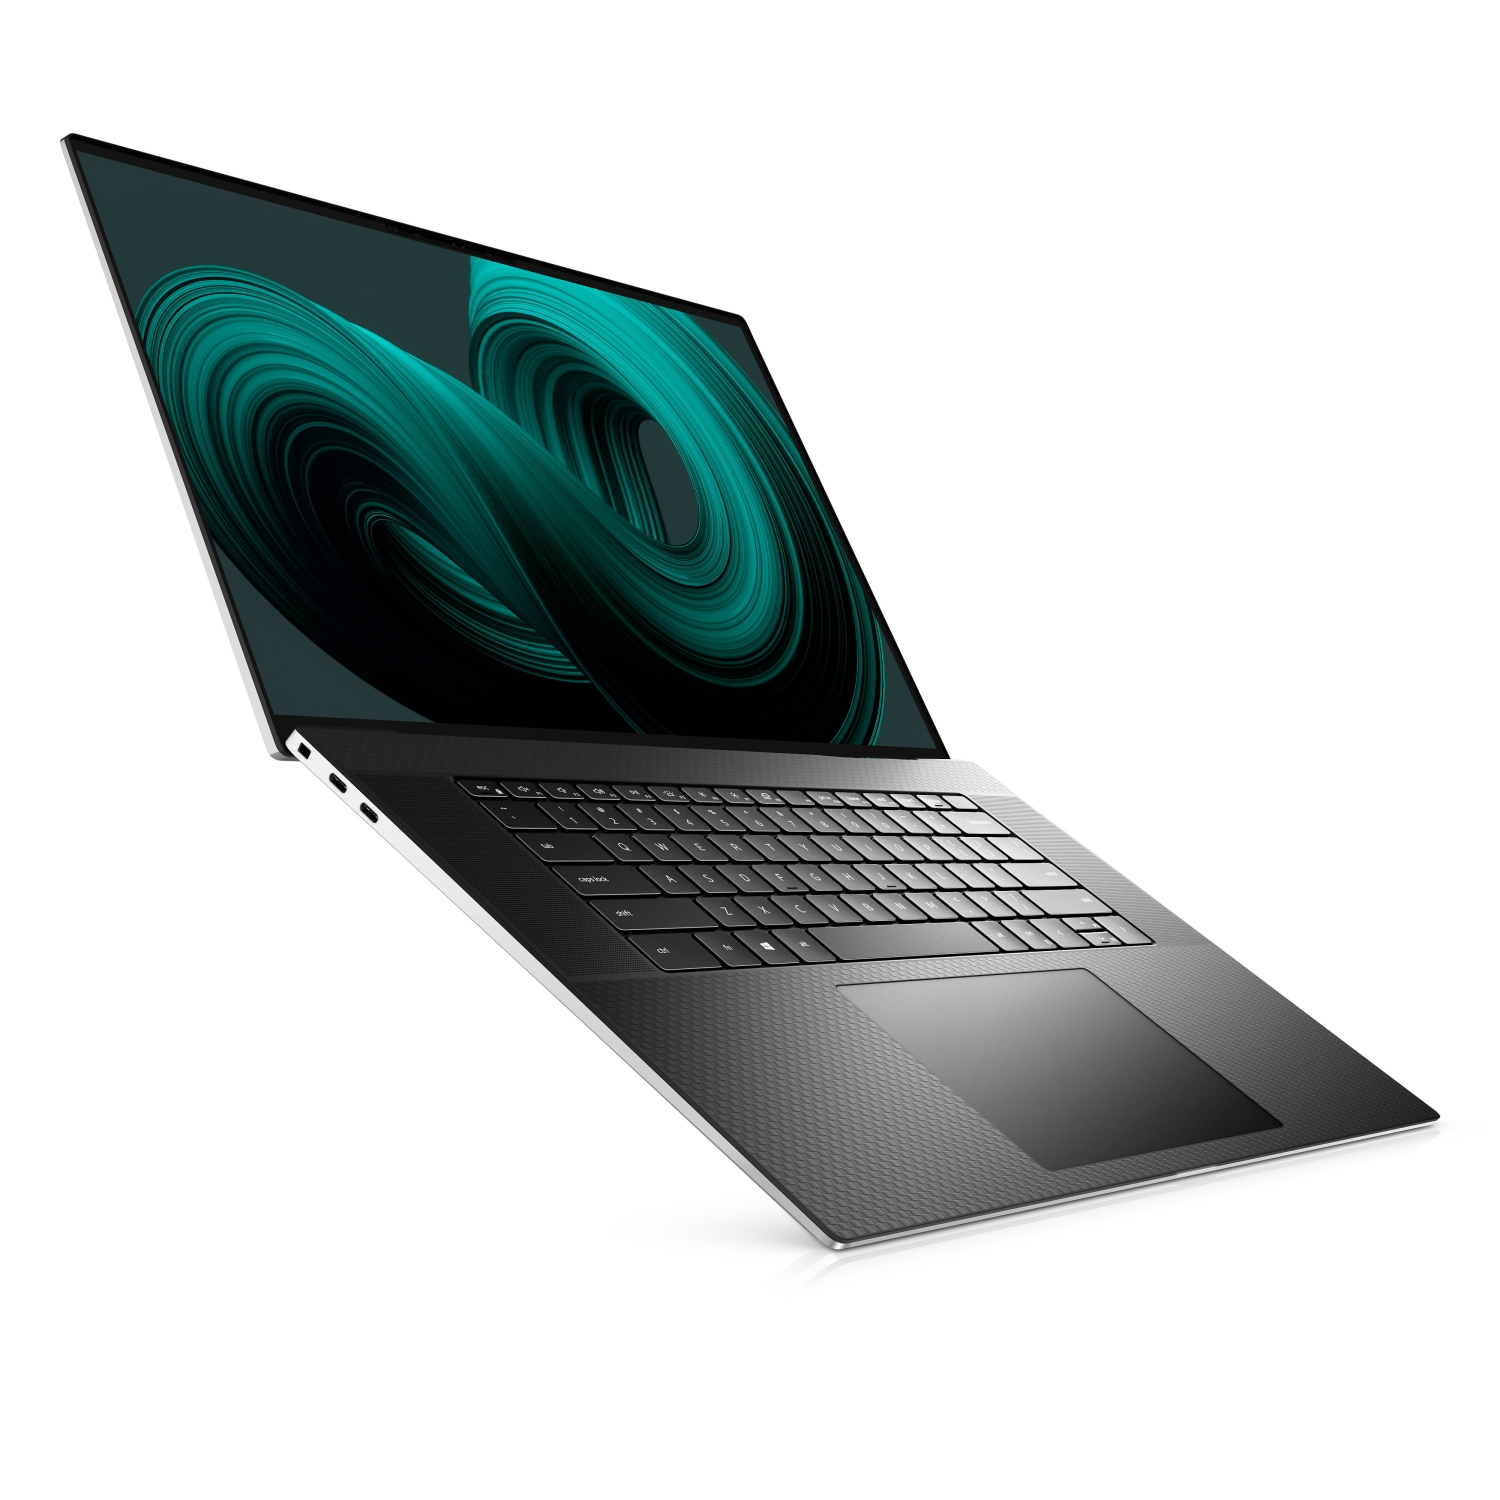 Refurbished (Excellent) - Dell XPS 17 9710 Laptop (2021) | 17" 4K Touch | Core i7 - 2TB SSD - 64GB RAM - RTX 3060 | 8 Cores @ 4.6 GHz - 11th Gen CPU Certified Refurbished